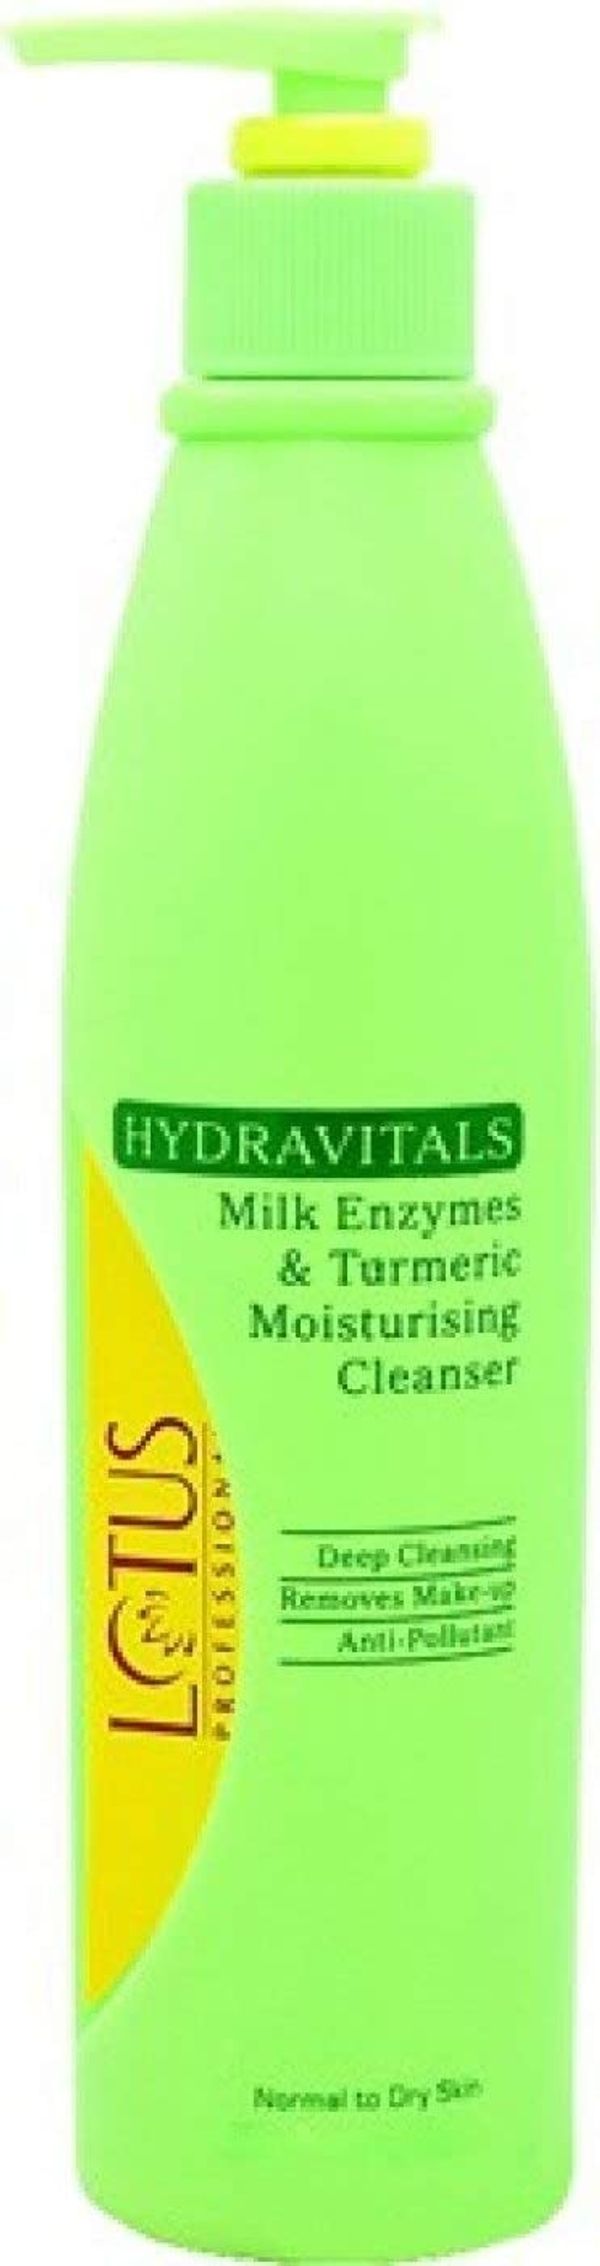 Lotus Professional Hydravitals Milk Enzymes and Turmeric Moisturising Cleanser,250ml